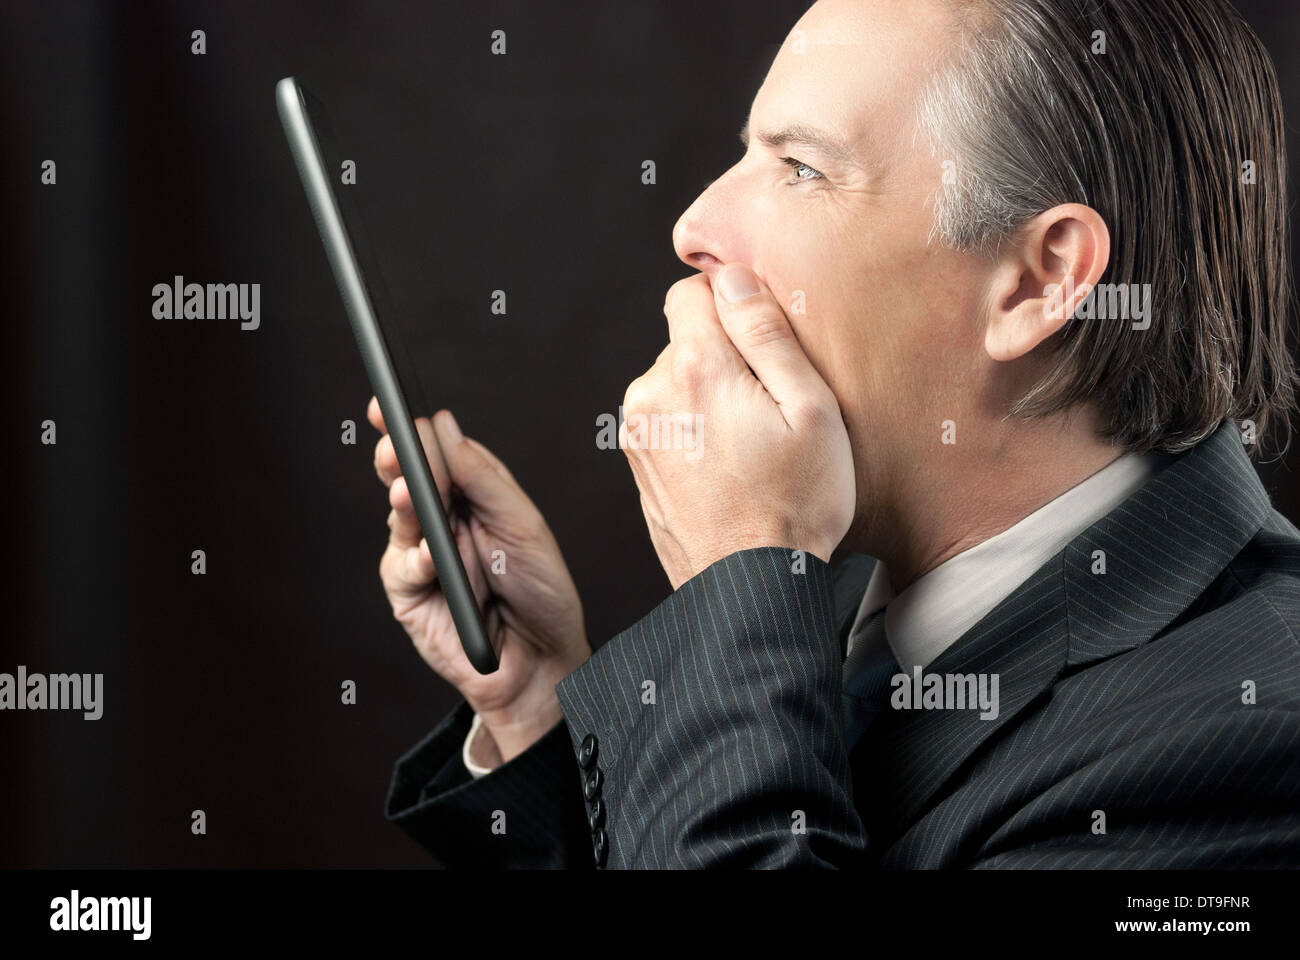 Close-up of a businessman looking at his tablet amazed Stock Photo